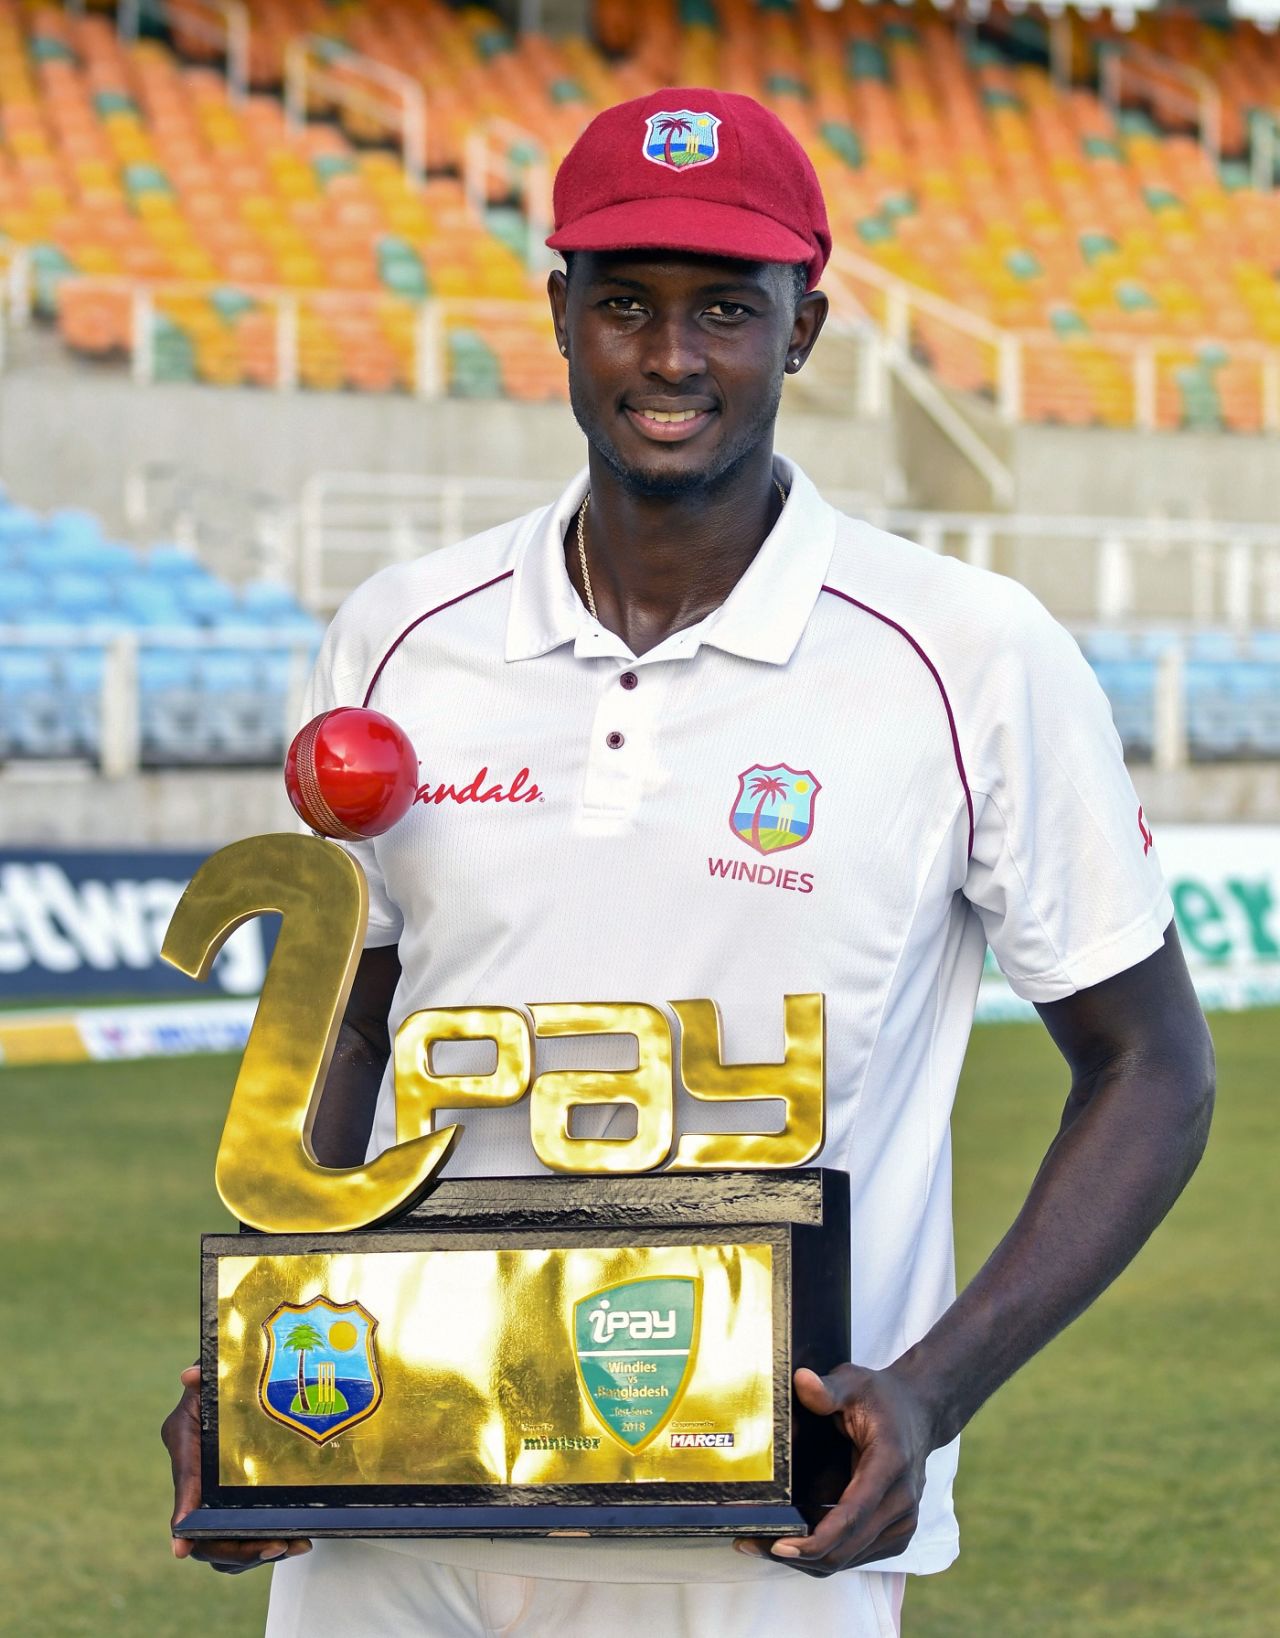 Jason Holder poses with the trophy after the series win, West Indies v Bangladesh, 2nd Test, Jamaica, 3rd day, July 14, 2018